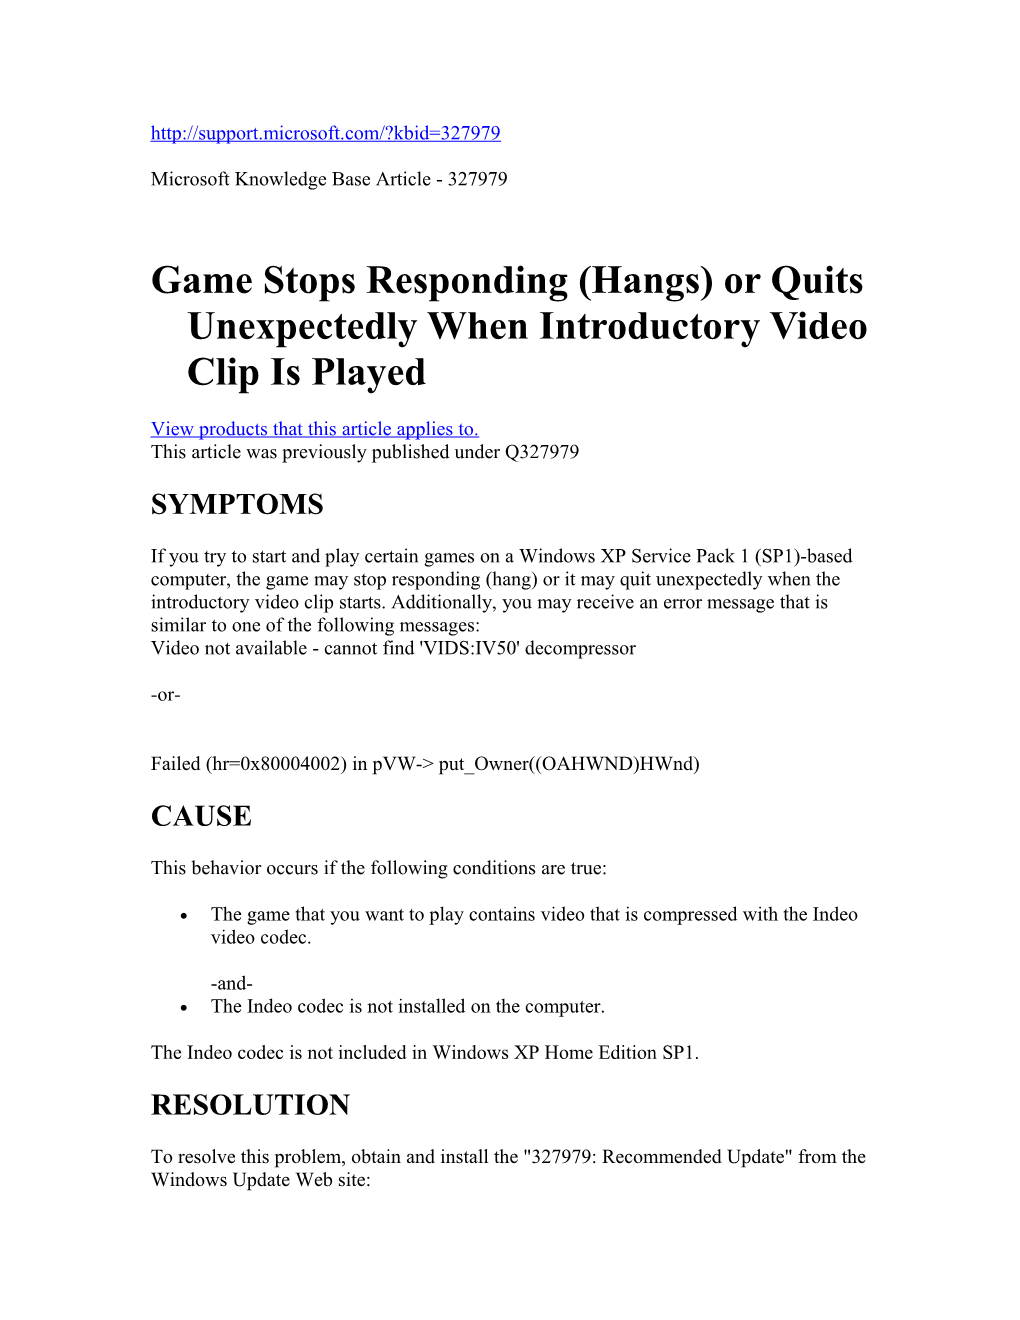 Game Stops Responding (Hangs) Or Quits Unexpectedly When Introductory Video Clip Is Played